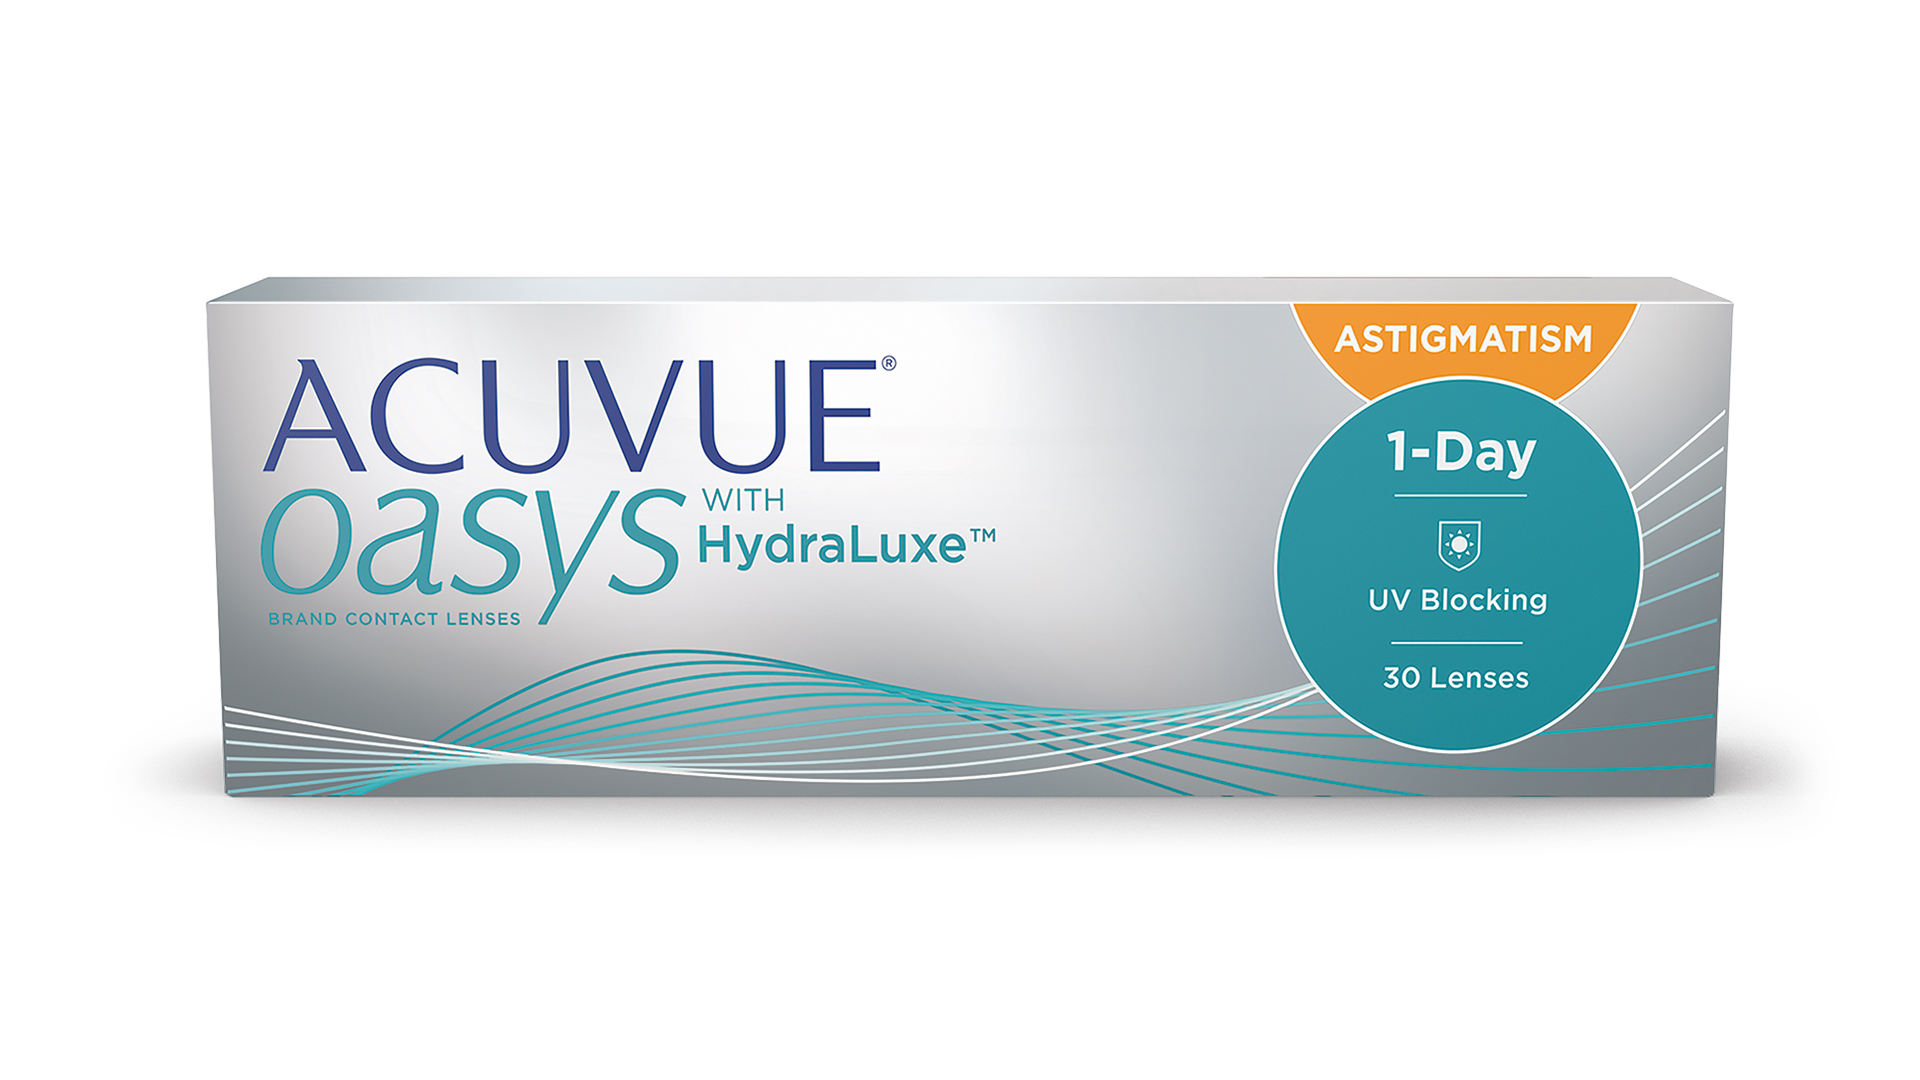 ACUVUE oasys 1-Day for astigmatism